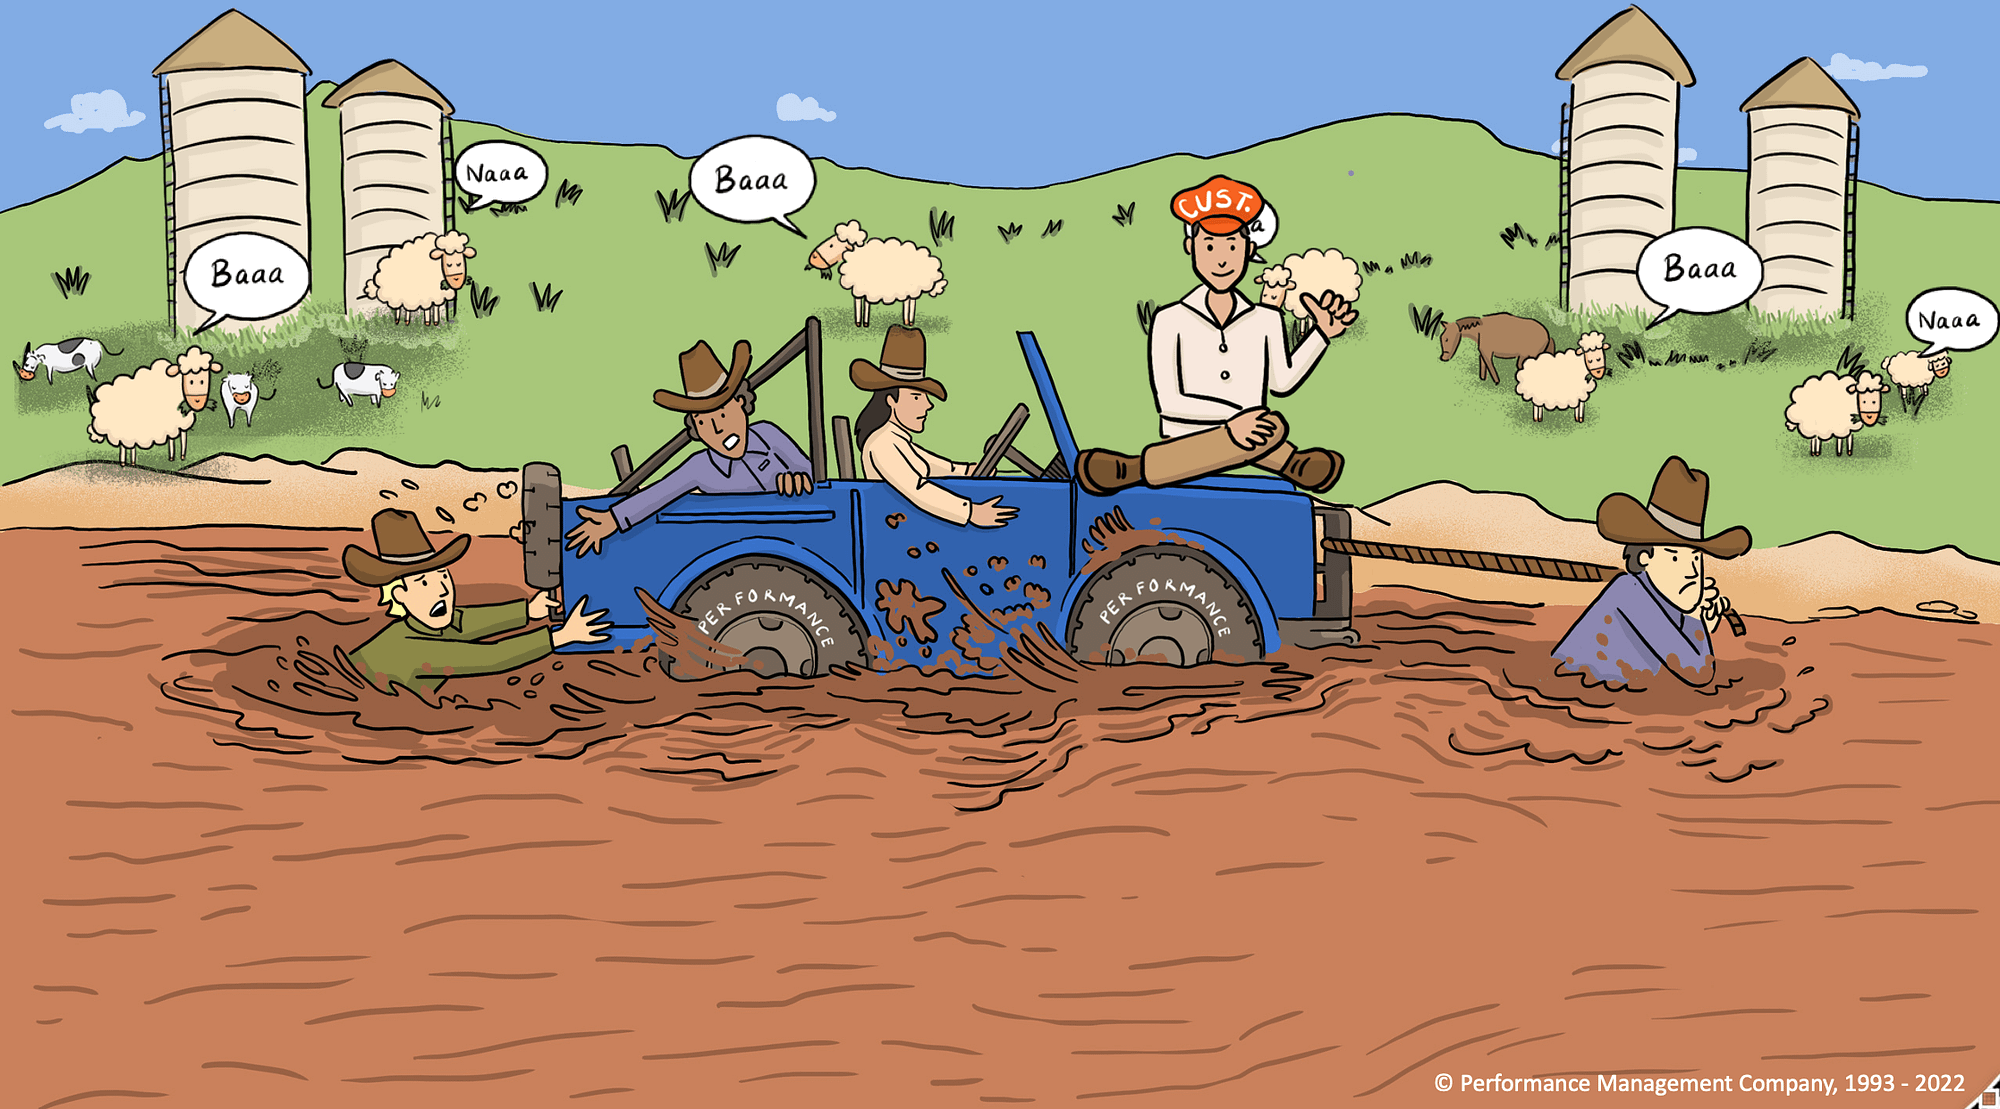 An image of mud, spectator sheep, silos and The Customer from The Search for The Lost Dutchman's Gold Mine teambuilding game